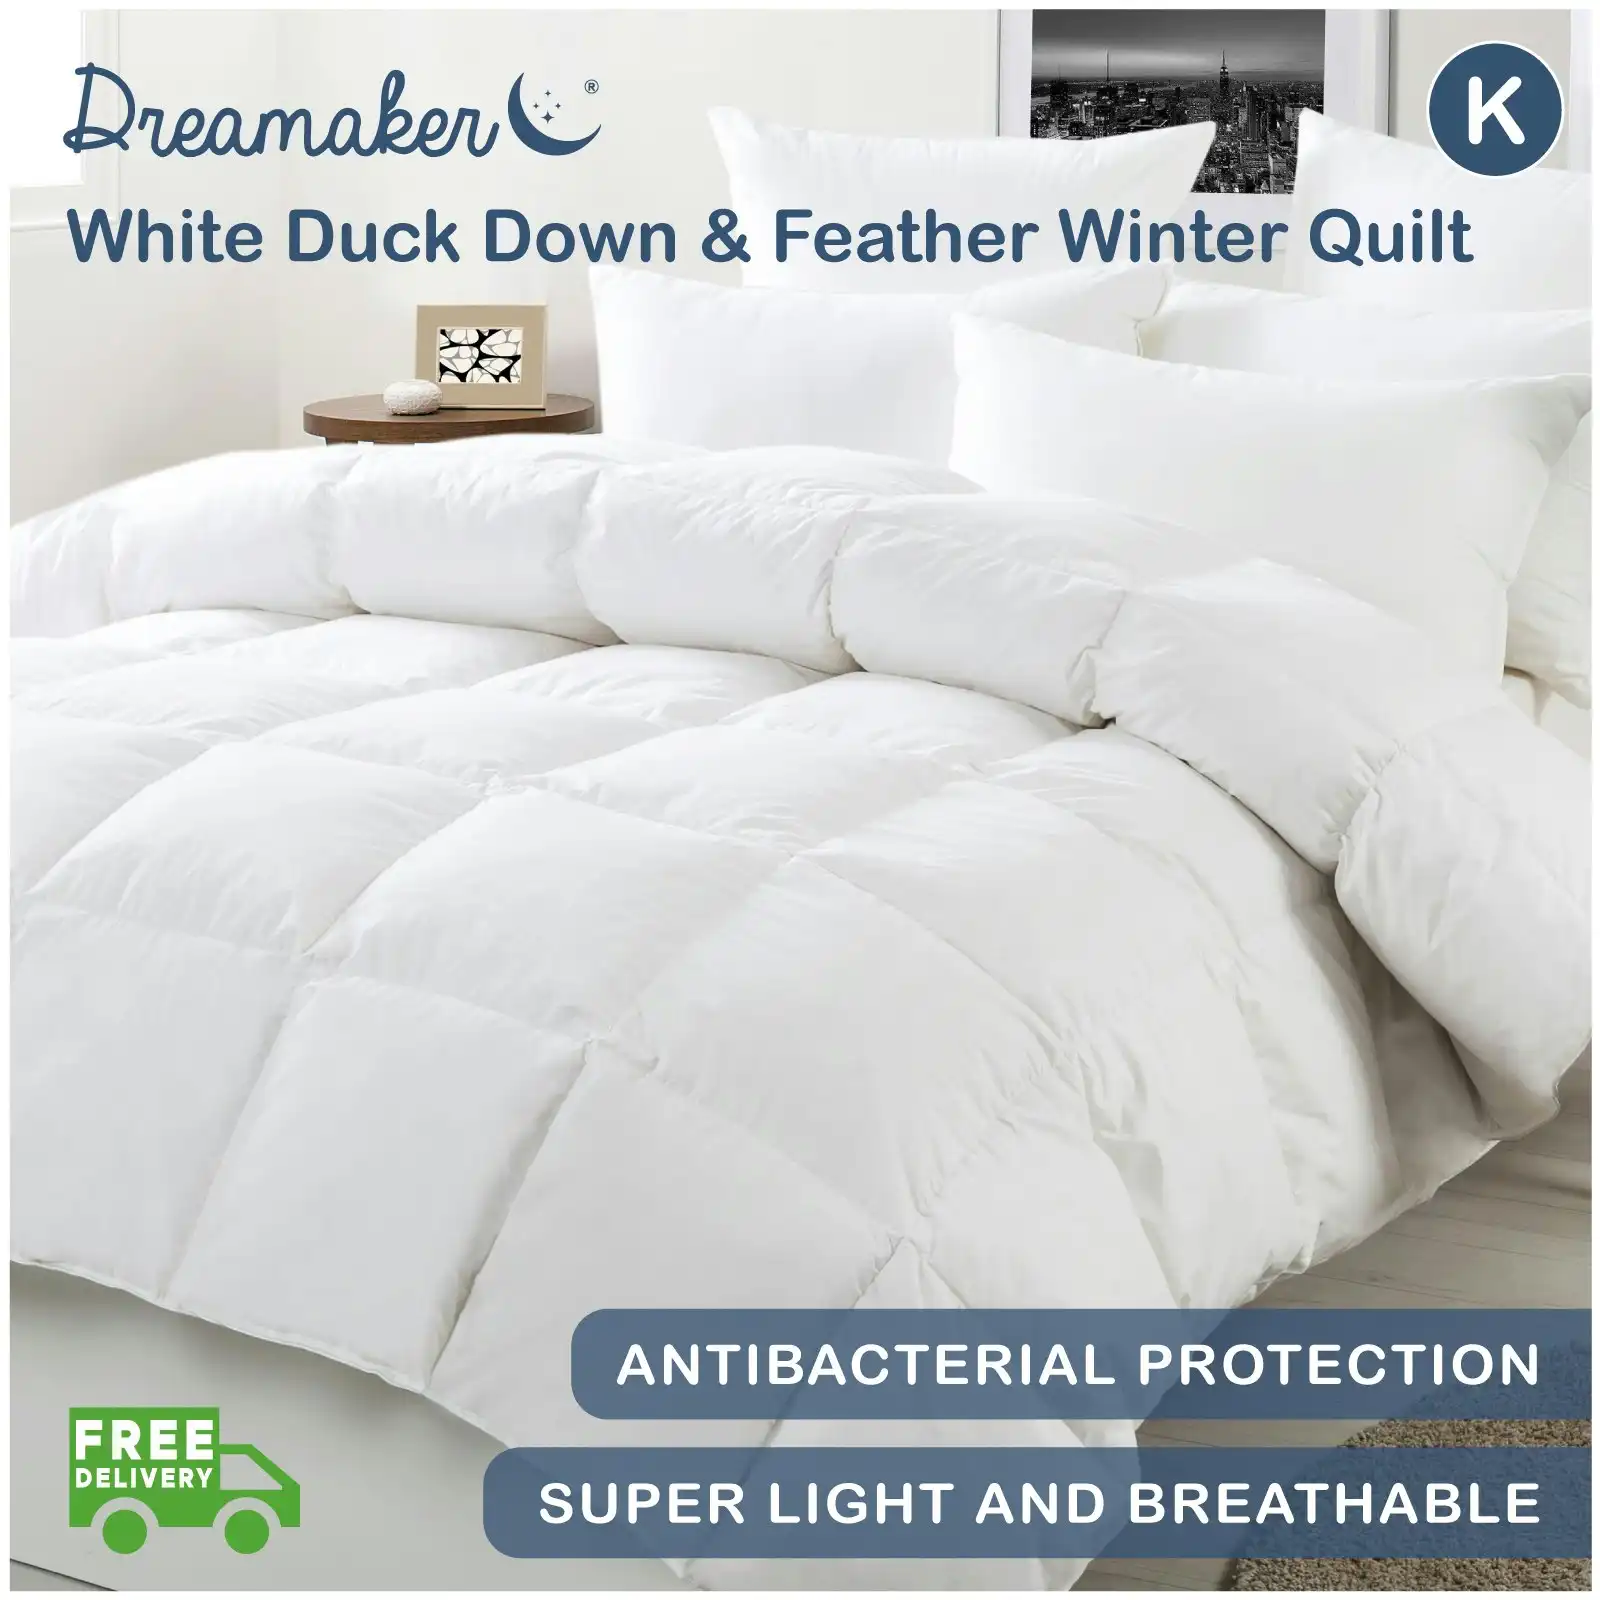 9009194 Dreamaker White Duck Down &Feather Quilt-5 KB